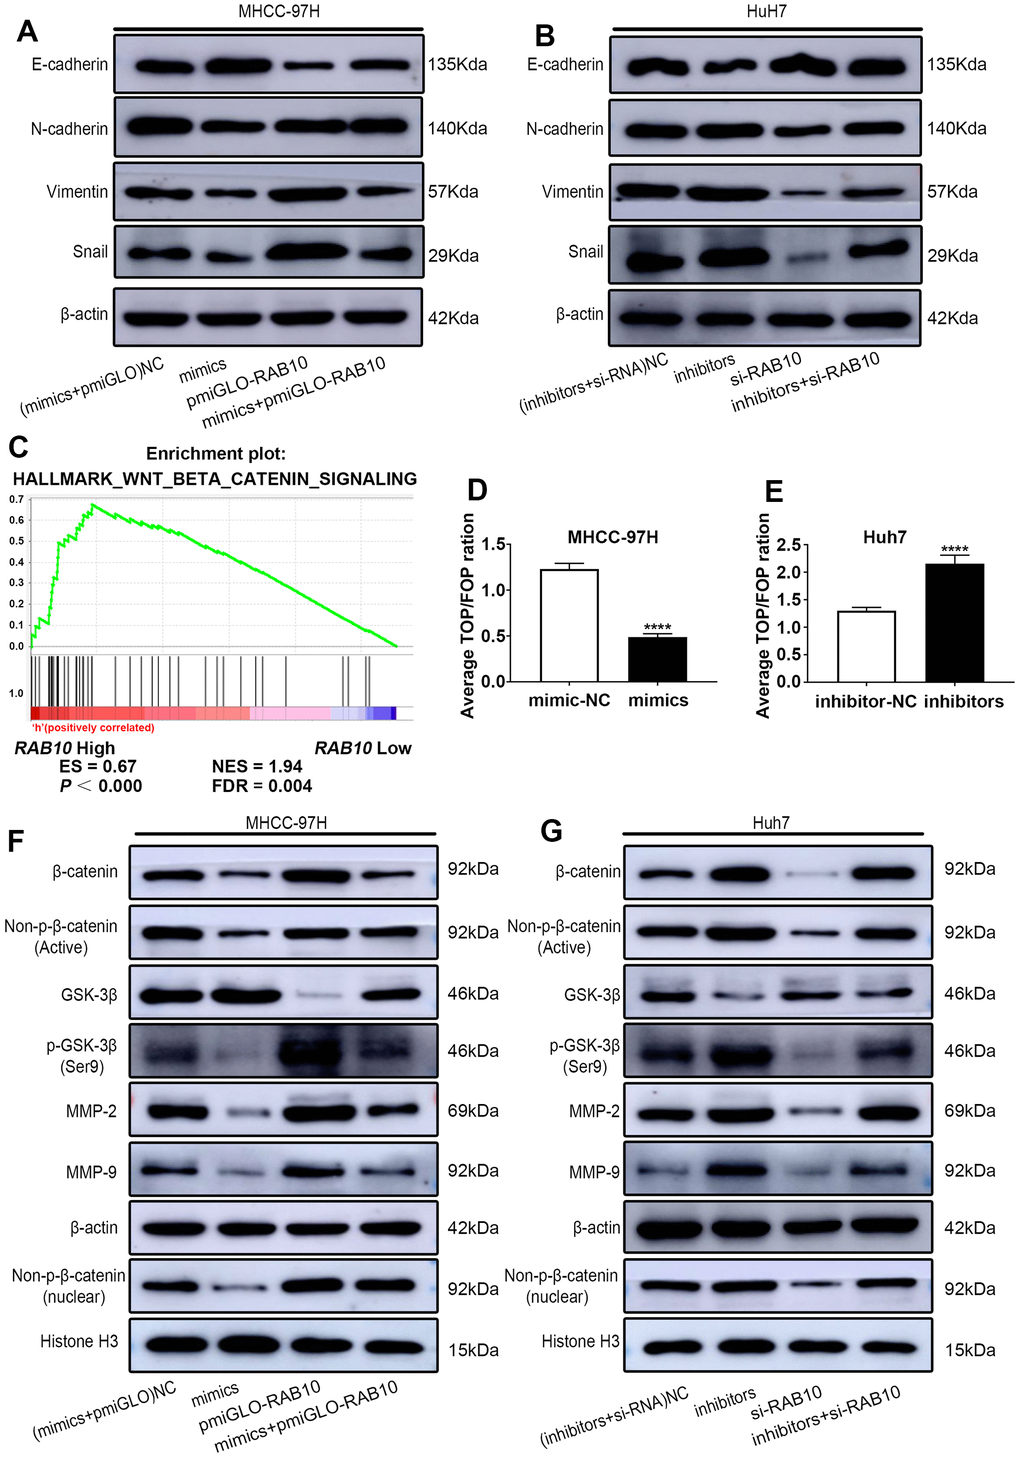 MiR-557 targets RAB10 to affect the process of EMT and inhibit Wnt/β-catenin signaling. (A) The protein of EMT process of NC cells, miR-557-overexpression cells, RAB10-overexpression cells, co-transfected miR-557 mimics and pmirGLO-RAB10 cells of MHCC-97H. (B) The protein of EMT process of NC cells, miR-557-down-expression cells, RAB10-down-expression cells, co-transfected miR-557 inhibitors and siRAB10 cells of Huh7. (C) GSEA of RAB10 expression and Wnt/β-catenin signaling. (D, E) TOP-flash/FOP-flash assays of mimic-NC cells and miR-557-overexpression cells of MHCC-97H, and TOP-flash/FOP-flash assays of inhibitor-NC cells and miR-557-inhibition cells of Huh7 cells. (F) Western blot analysis of AKT/FOXO3a signaling-related proteins in NC cells, miR-557-overexpression cells, RAB10-overexpression cells, co-transfected miR-557 mimics and pmirGLO-RAB10 cells of MHCC-97H. (G) Western blot analysis of AKT/FOXO3a signaling-related proteins in NC cells, miR-557-down-expression cells, RAB10-down-expression cells, co-transfected miR-557 inhibitors and siRAB10 cells of Huh7. All blots were cut prior to hybridisation with antibodies during western blotting. (****P